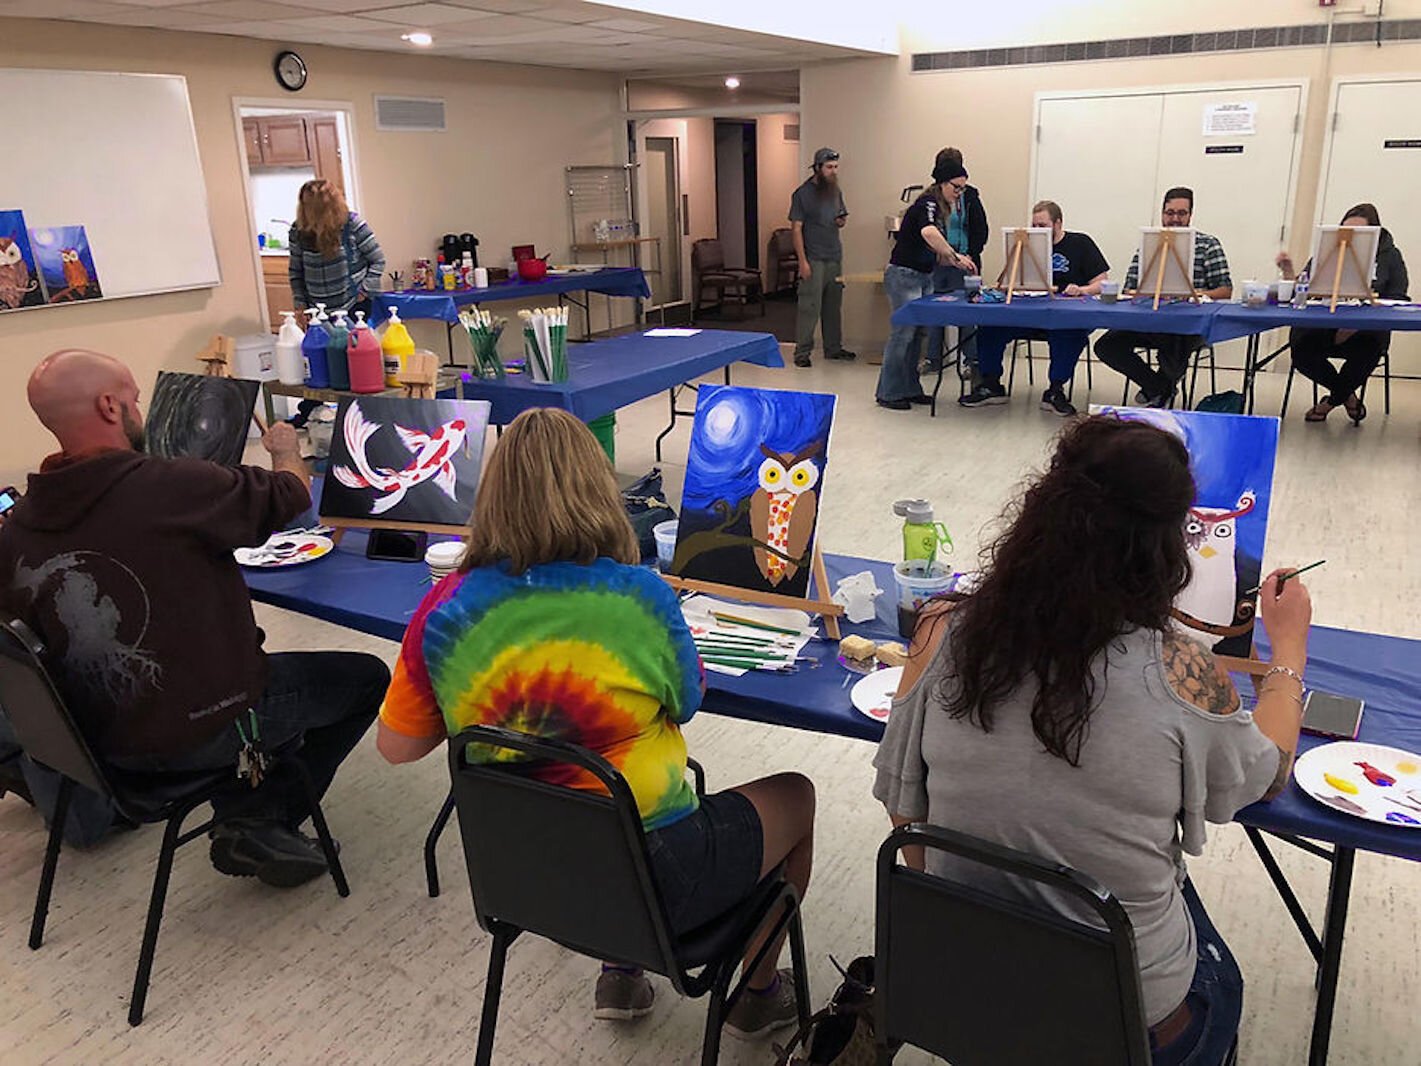 Coffee and Canvas, in which participants produce artwork, is among the personal growth, recreational, and community-building activities run by COPE Network.